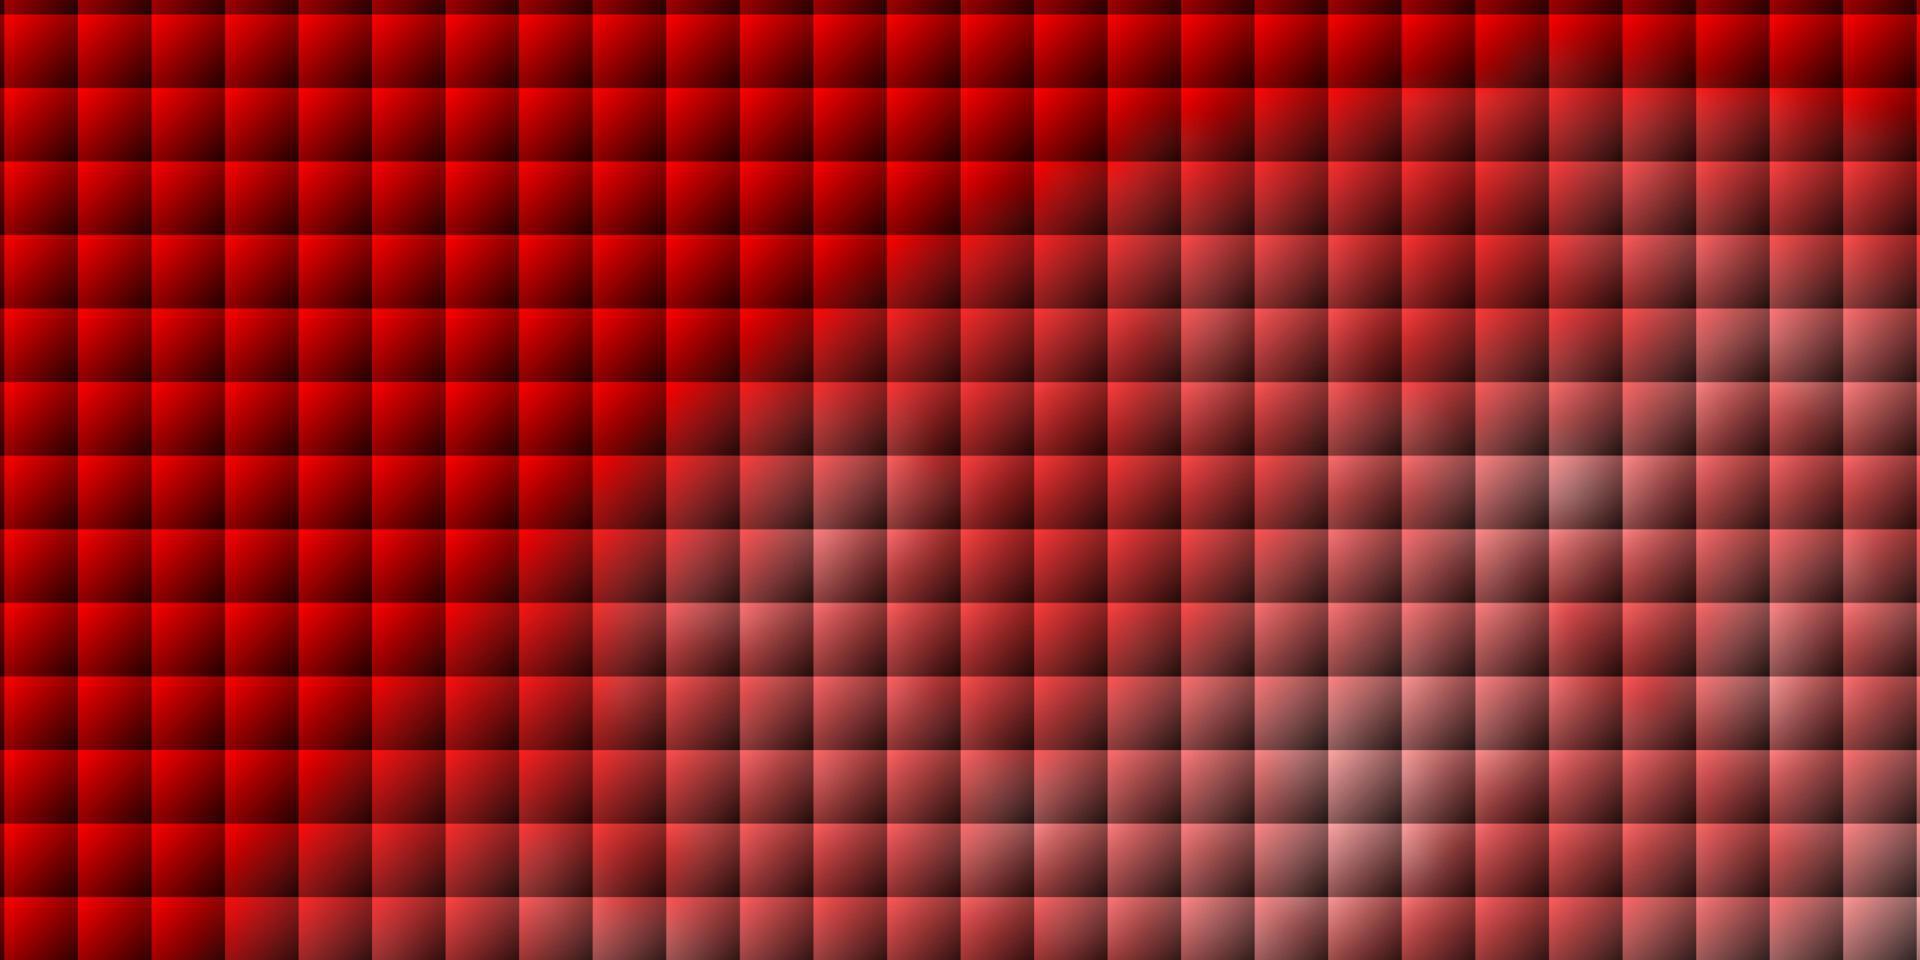 Light Red vector layout with lines, rectangles.